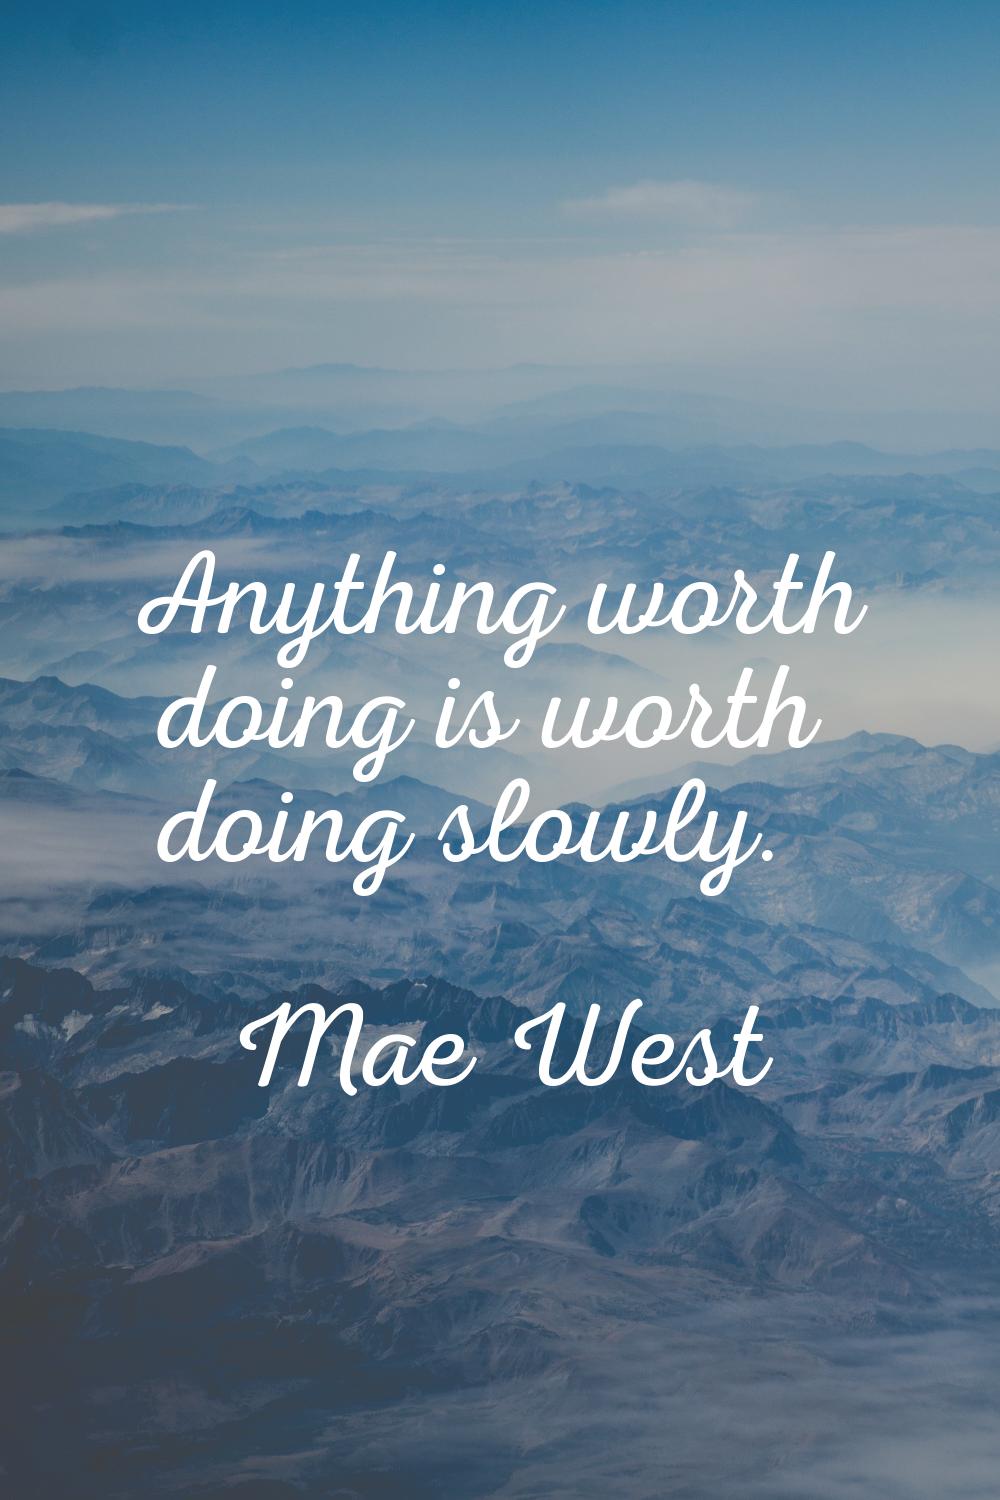 Anything worth doing is worth doing slowly.